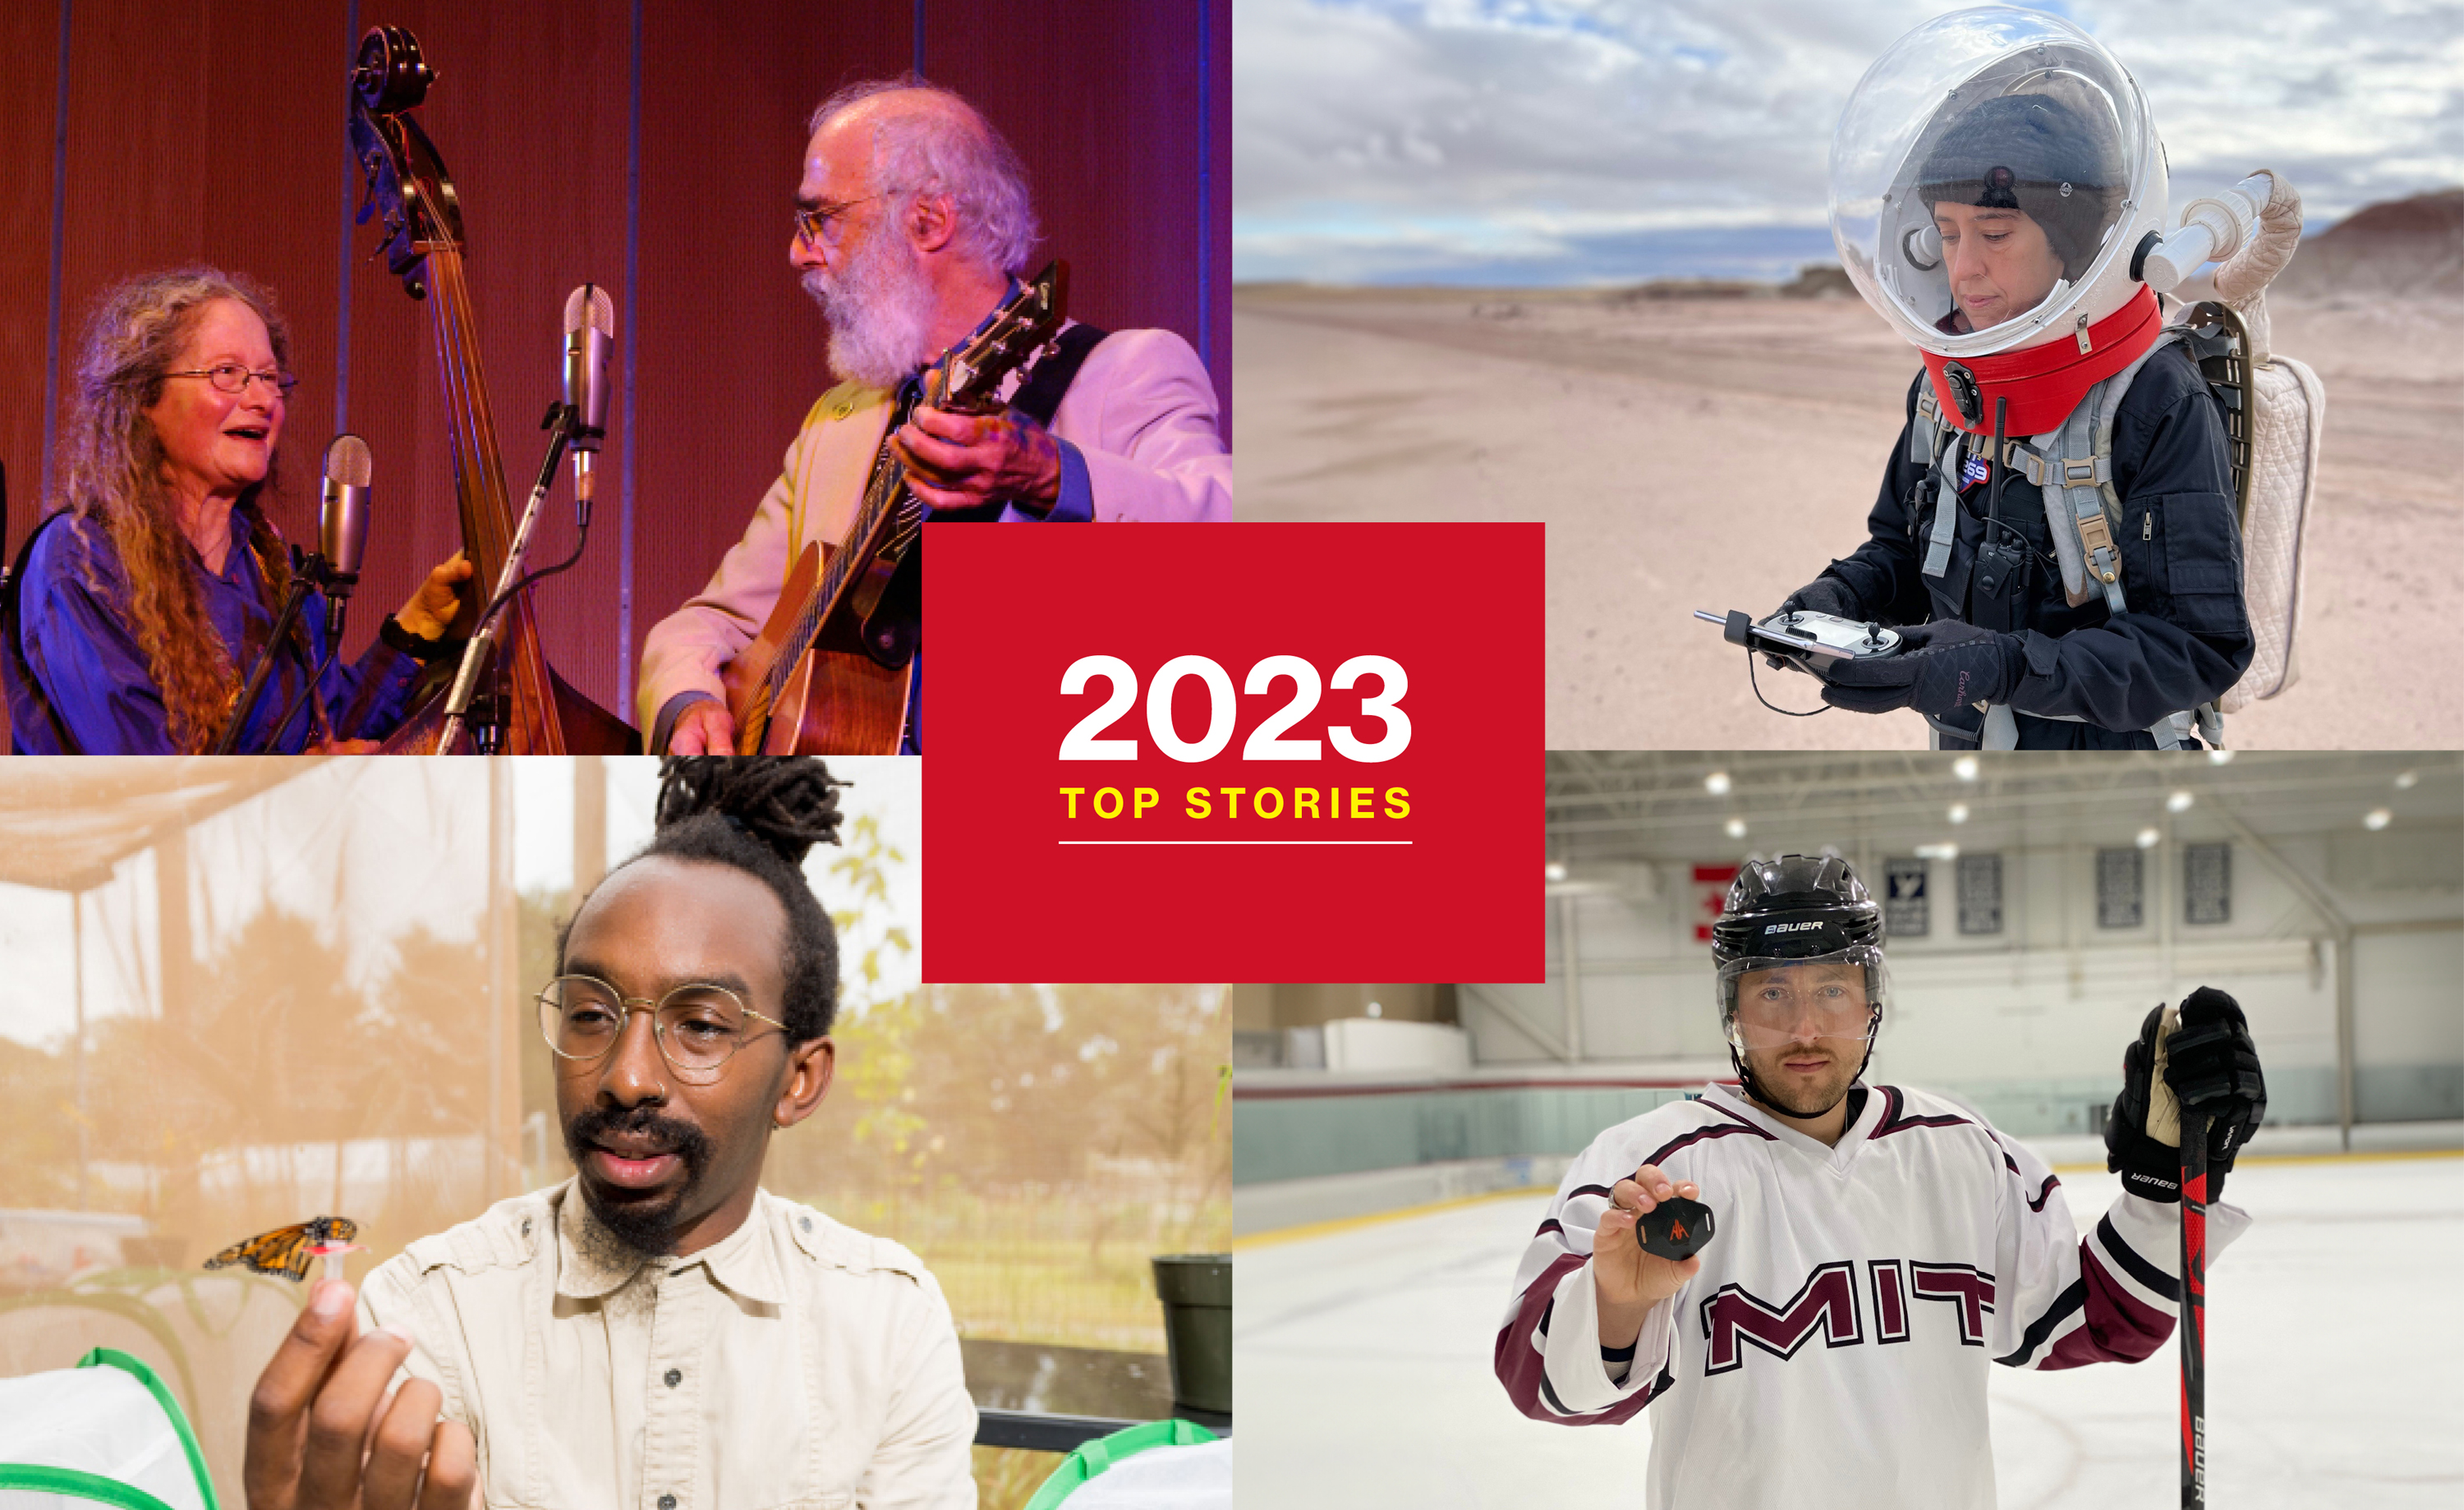 A grid of four images (clockwise from top left): A man and women playing instruments, a woman with a space suit on with a desert-like background, a man at an indoor rink wearing a hockey uniform and holding a puck, and a man holding a monarch butterfly